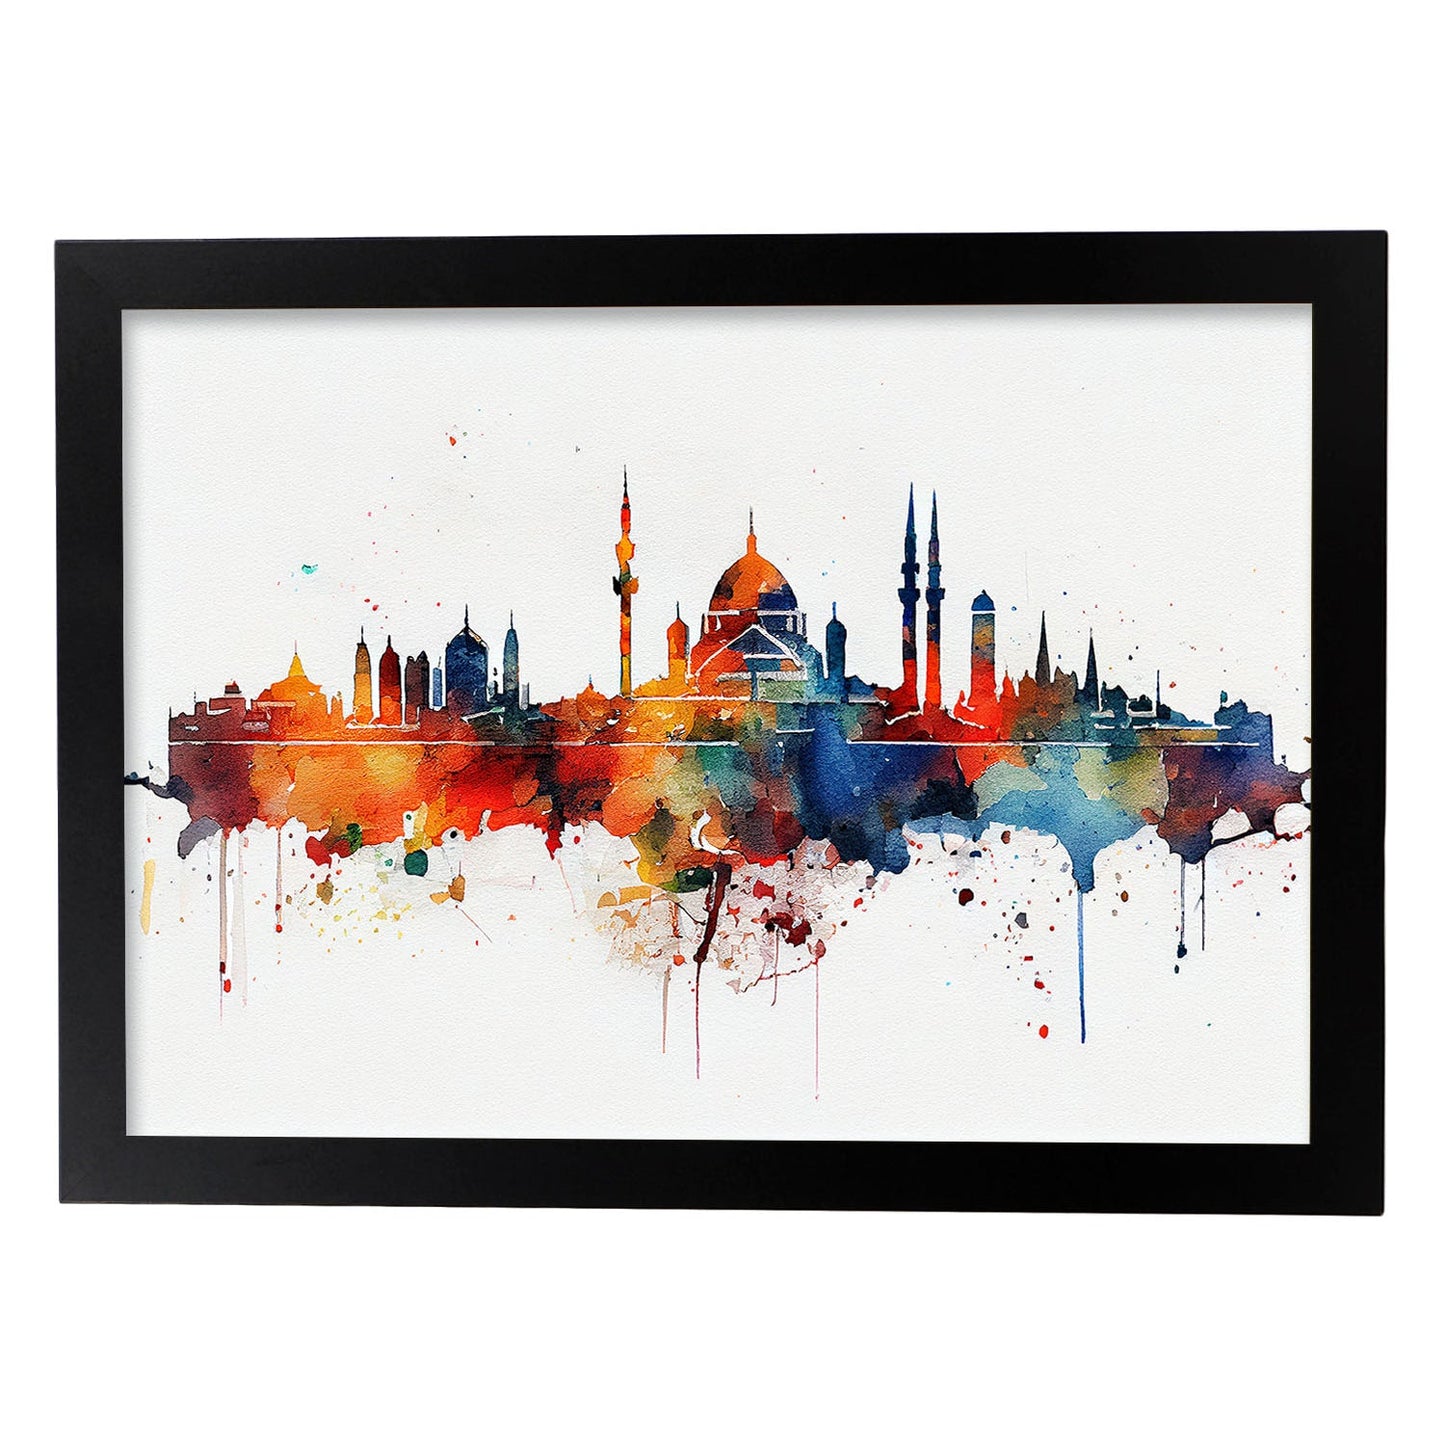 Nacnic watercolor of a skyline of the city of Istanbul_3. Aesthetic Wall Art Prints for Bedroom or Living Room Design.